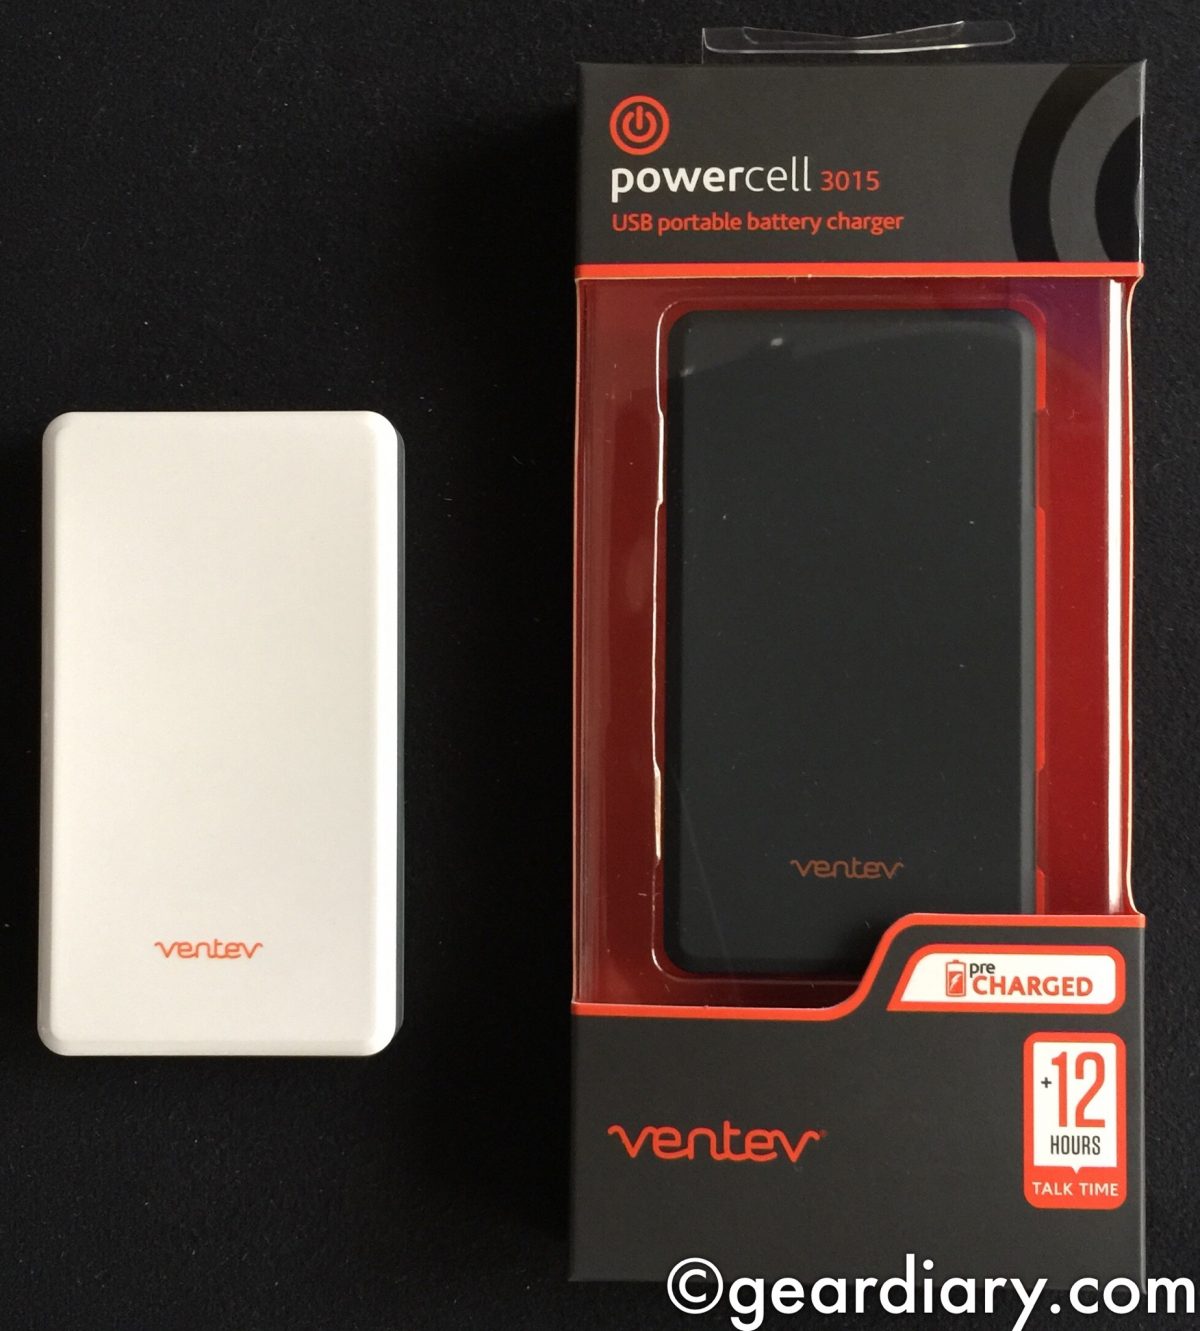 Ventev Powercell 3015 External Battery Review and Giveaway